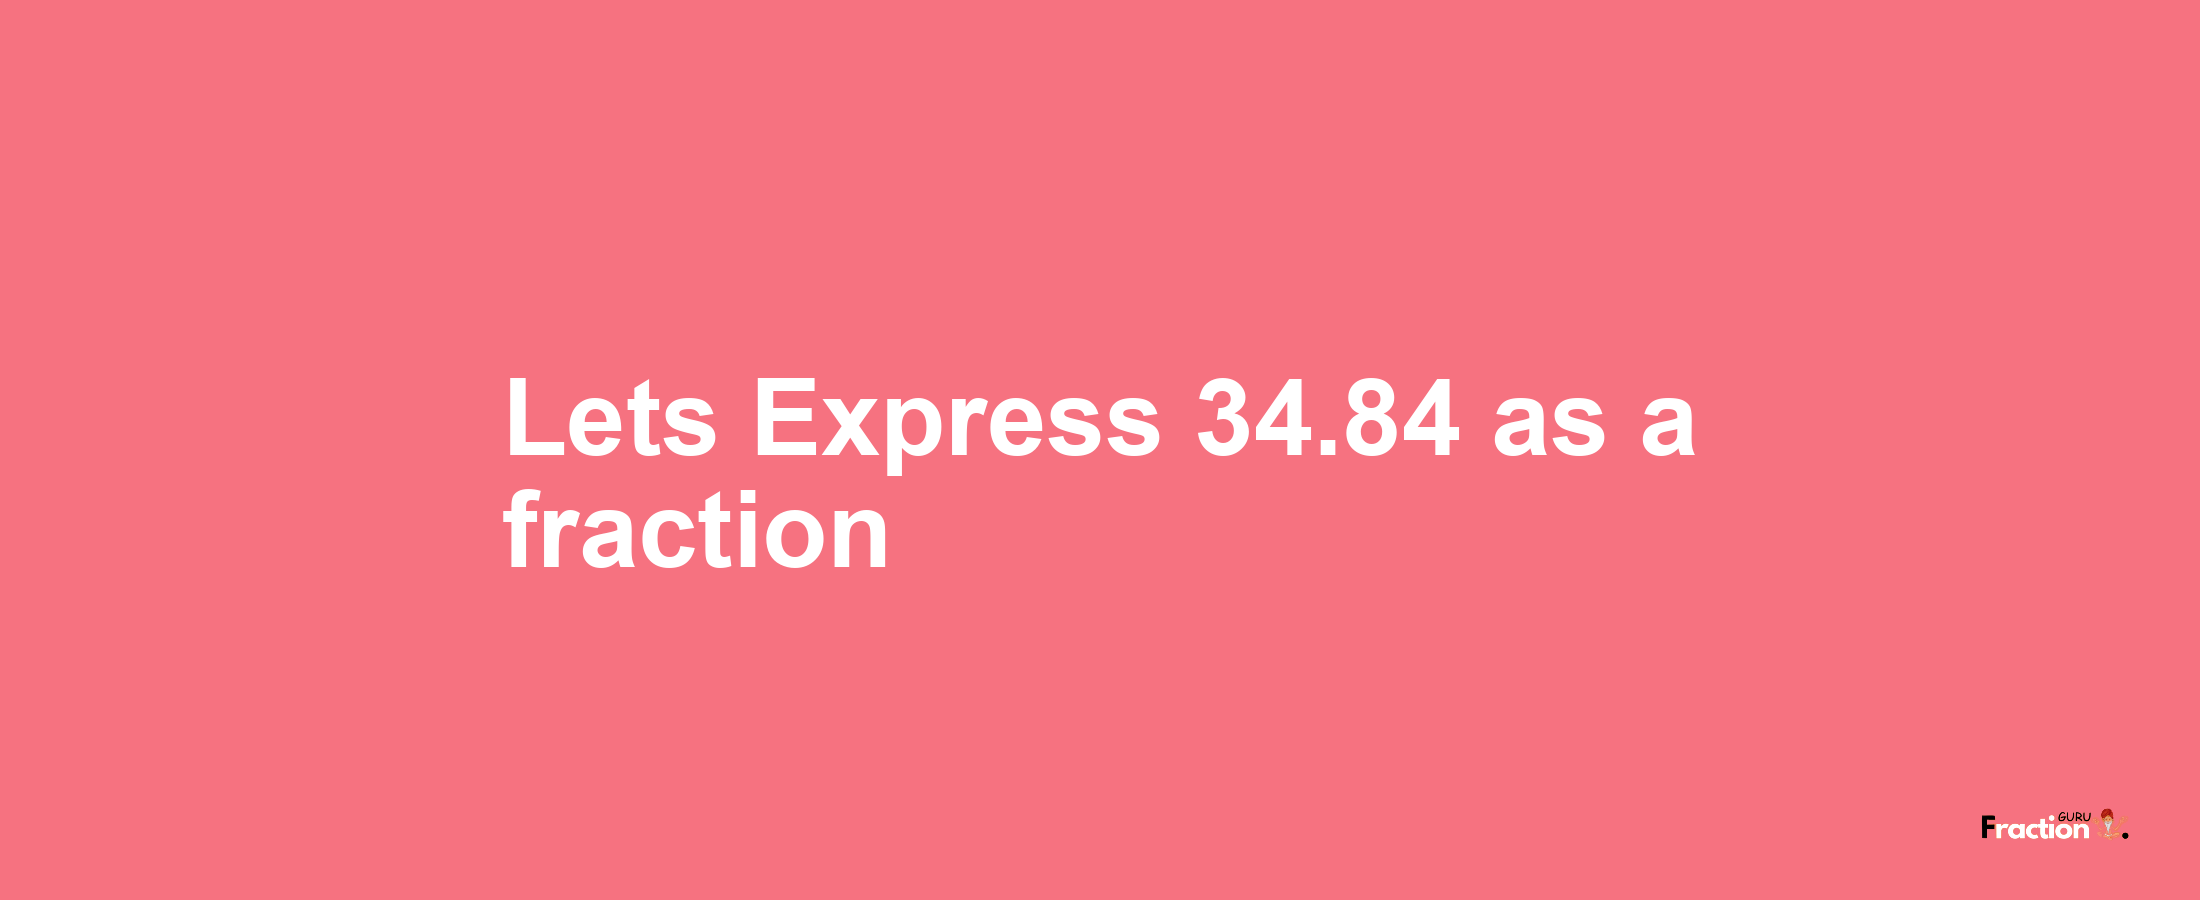 Lets Express 34.84 as afraction